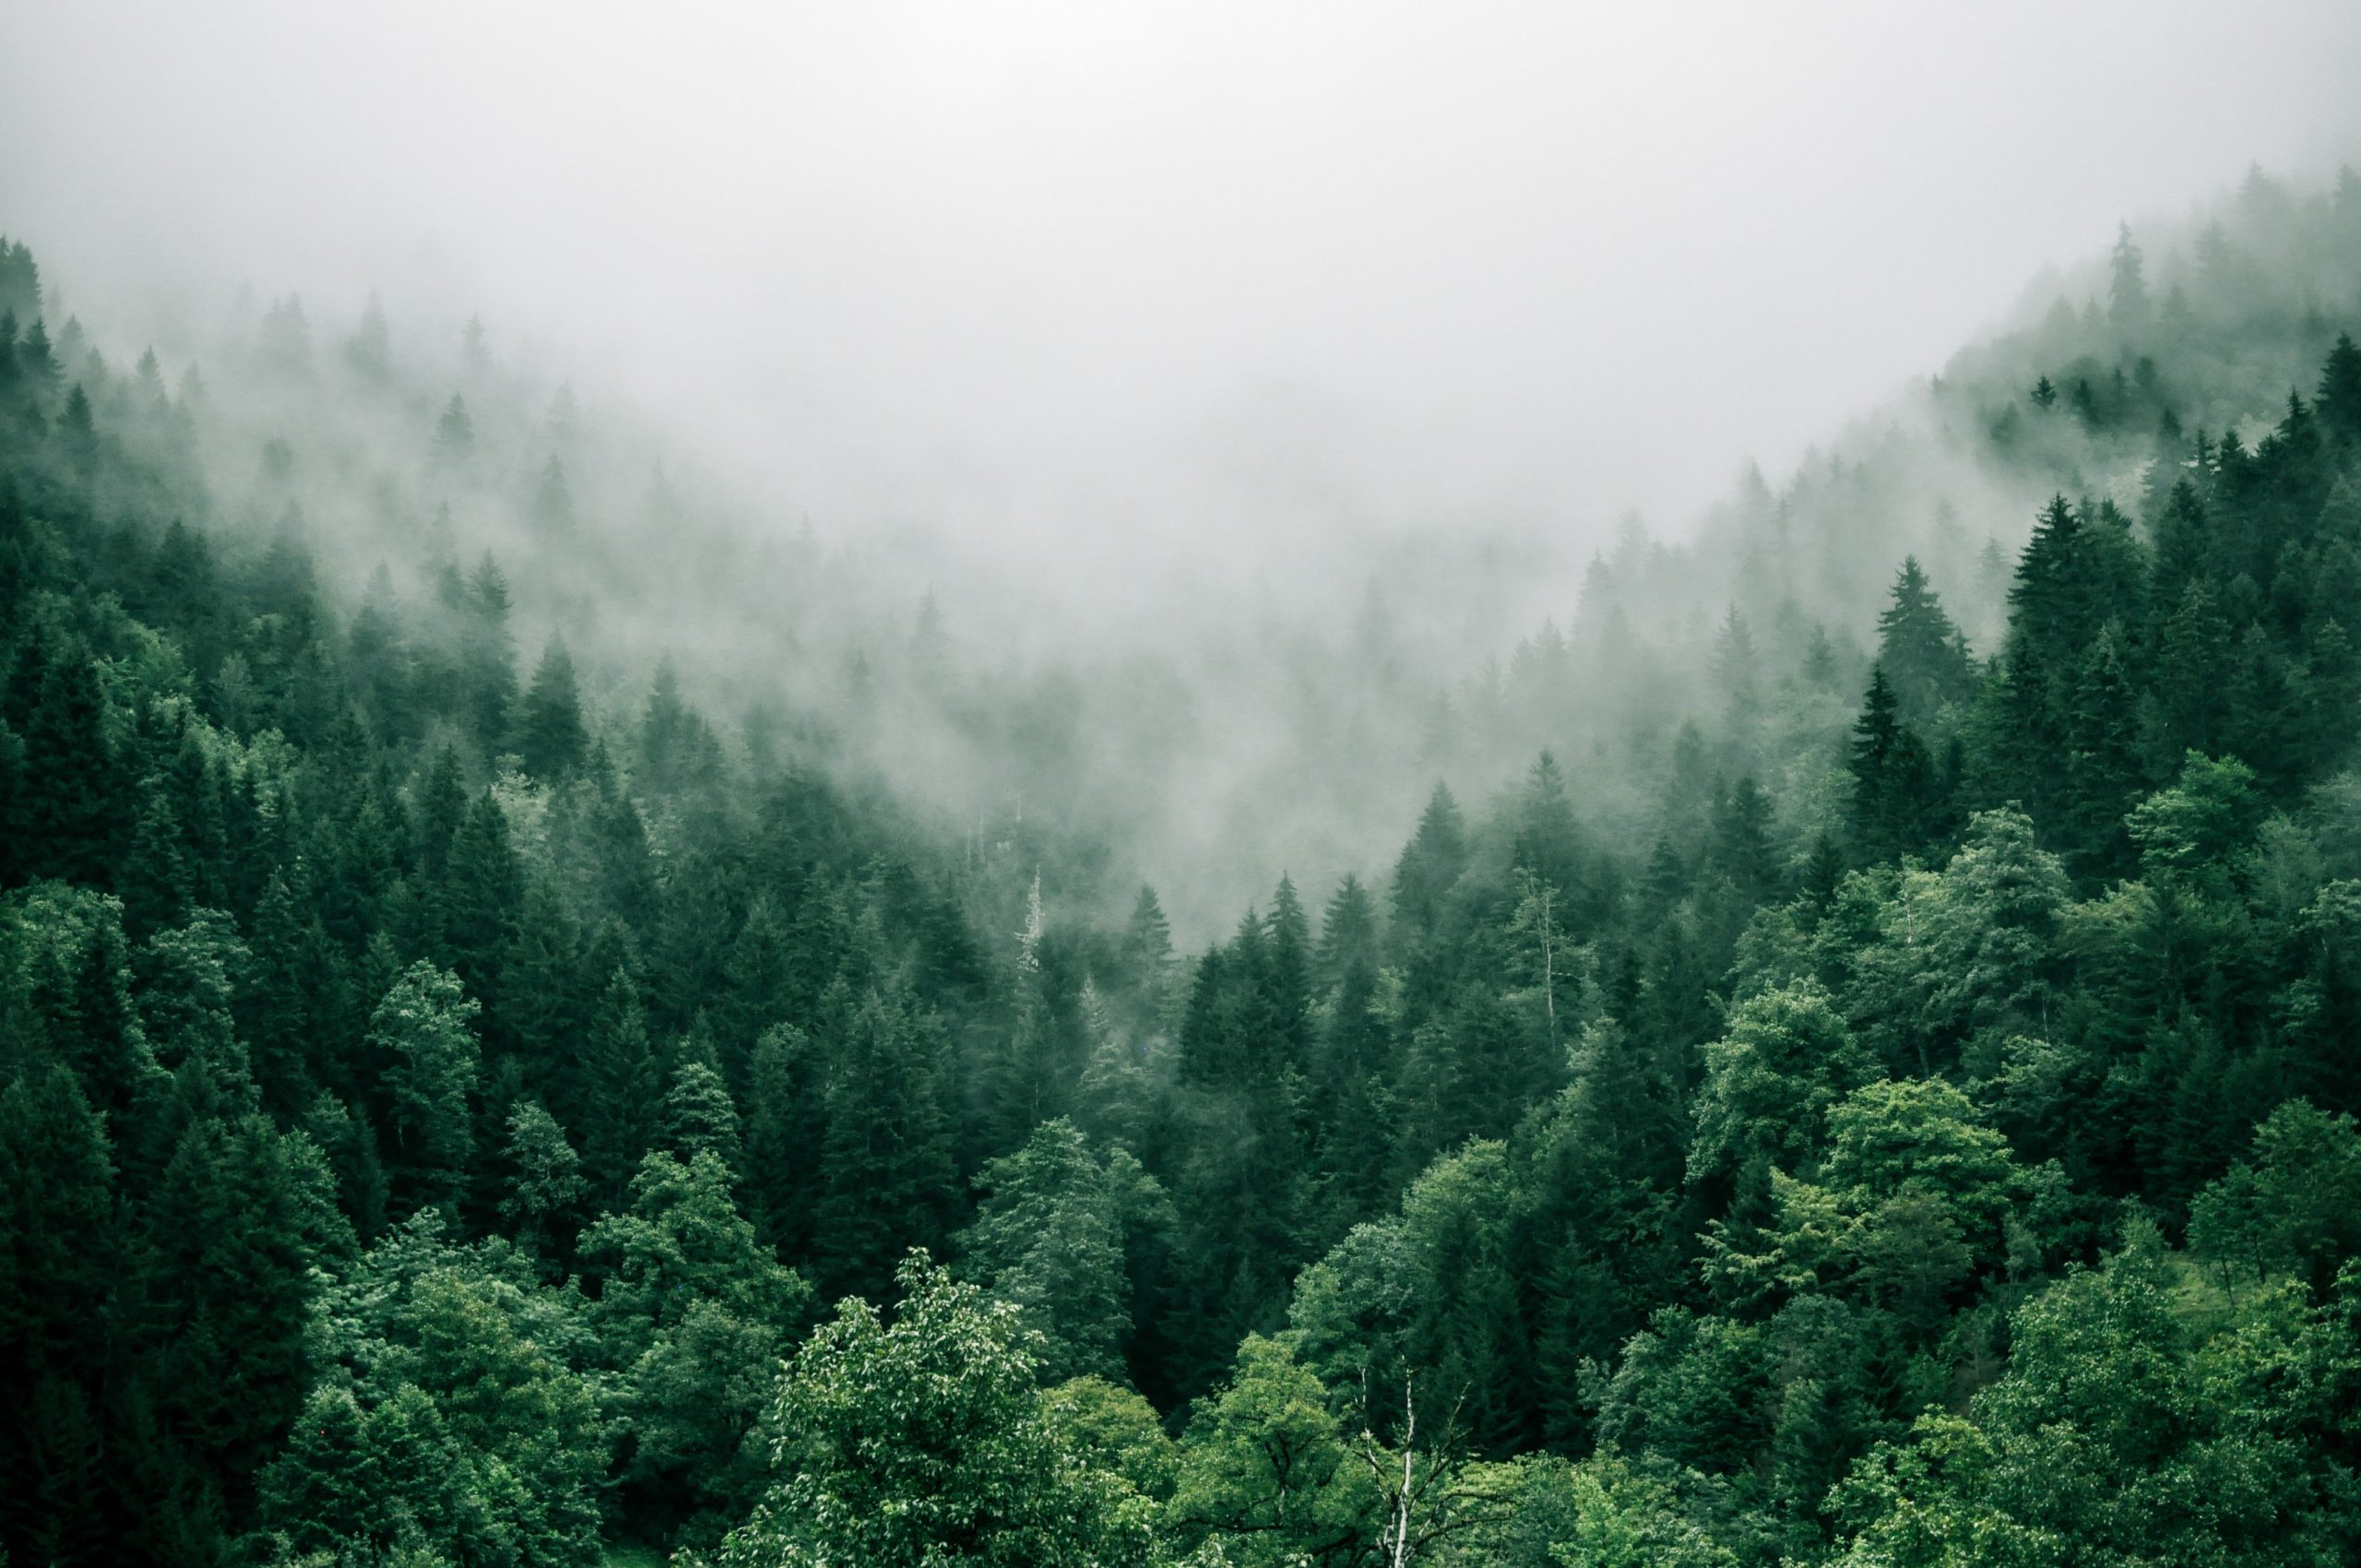 A foggy forest with lush, green trees.